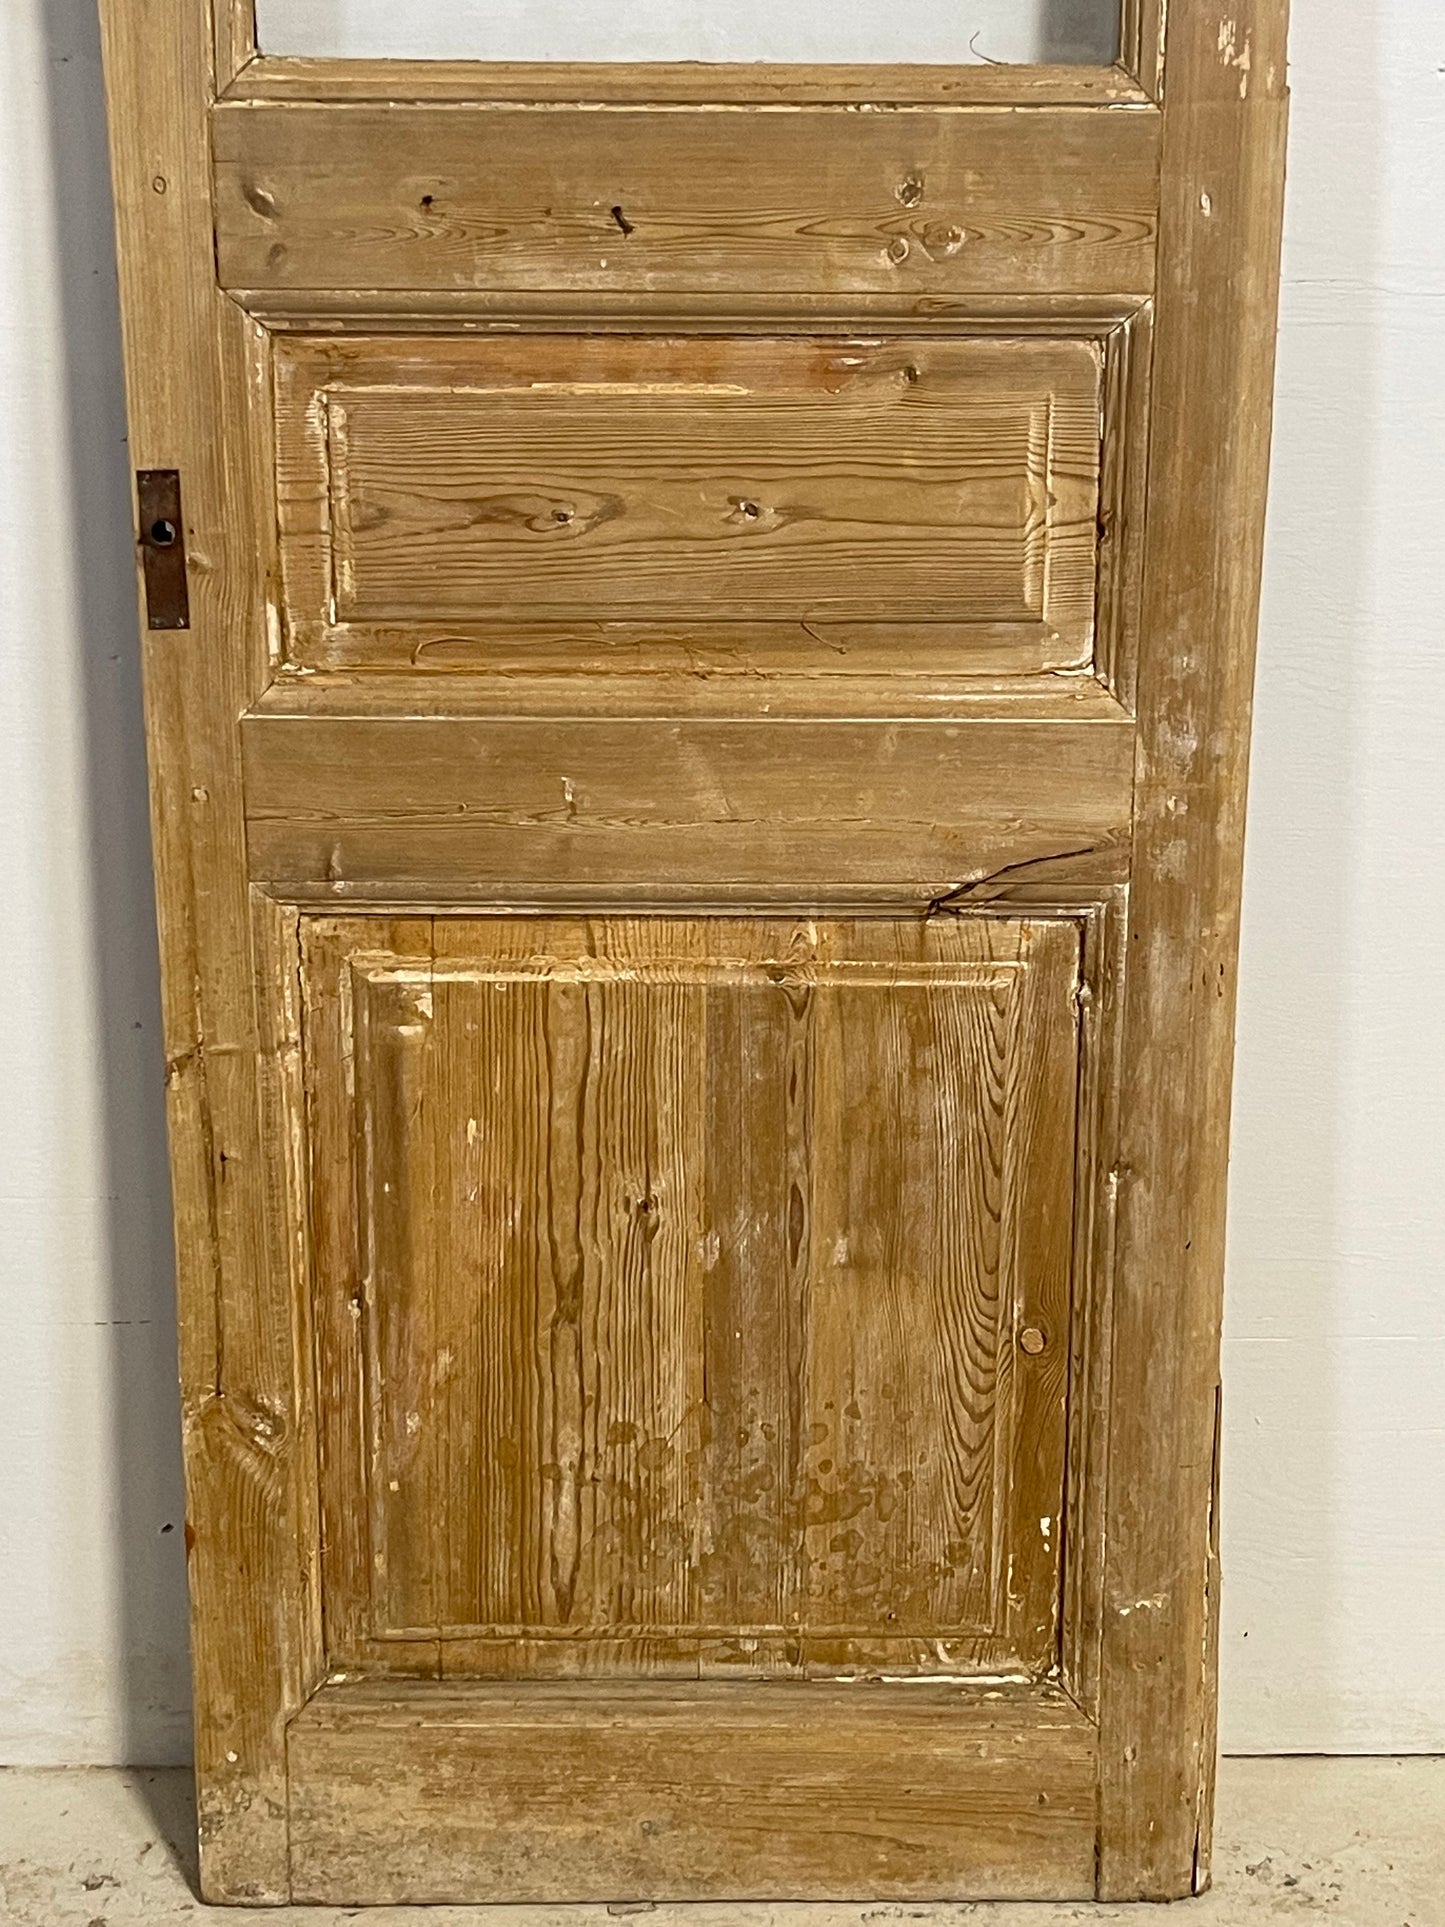 Antique French Panel Door with Glass  (90.5x26.75) L252